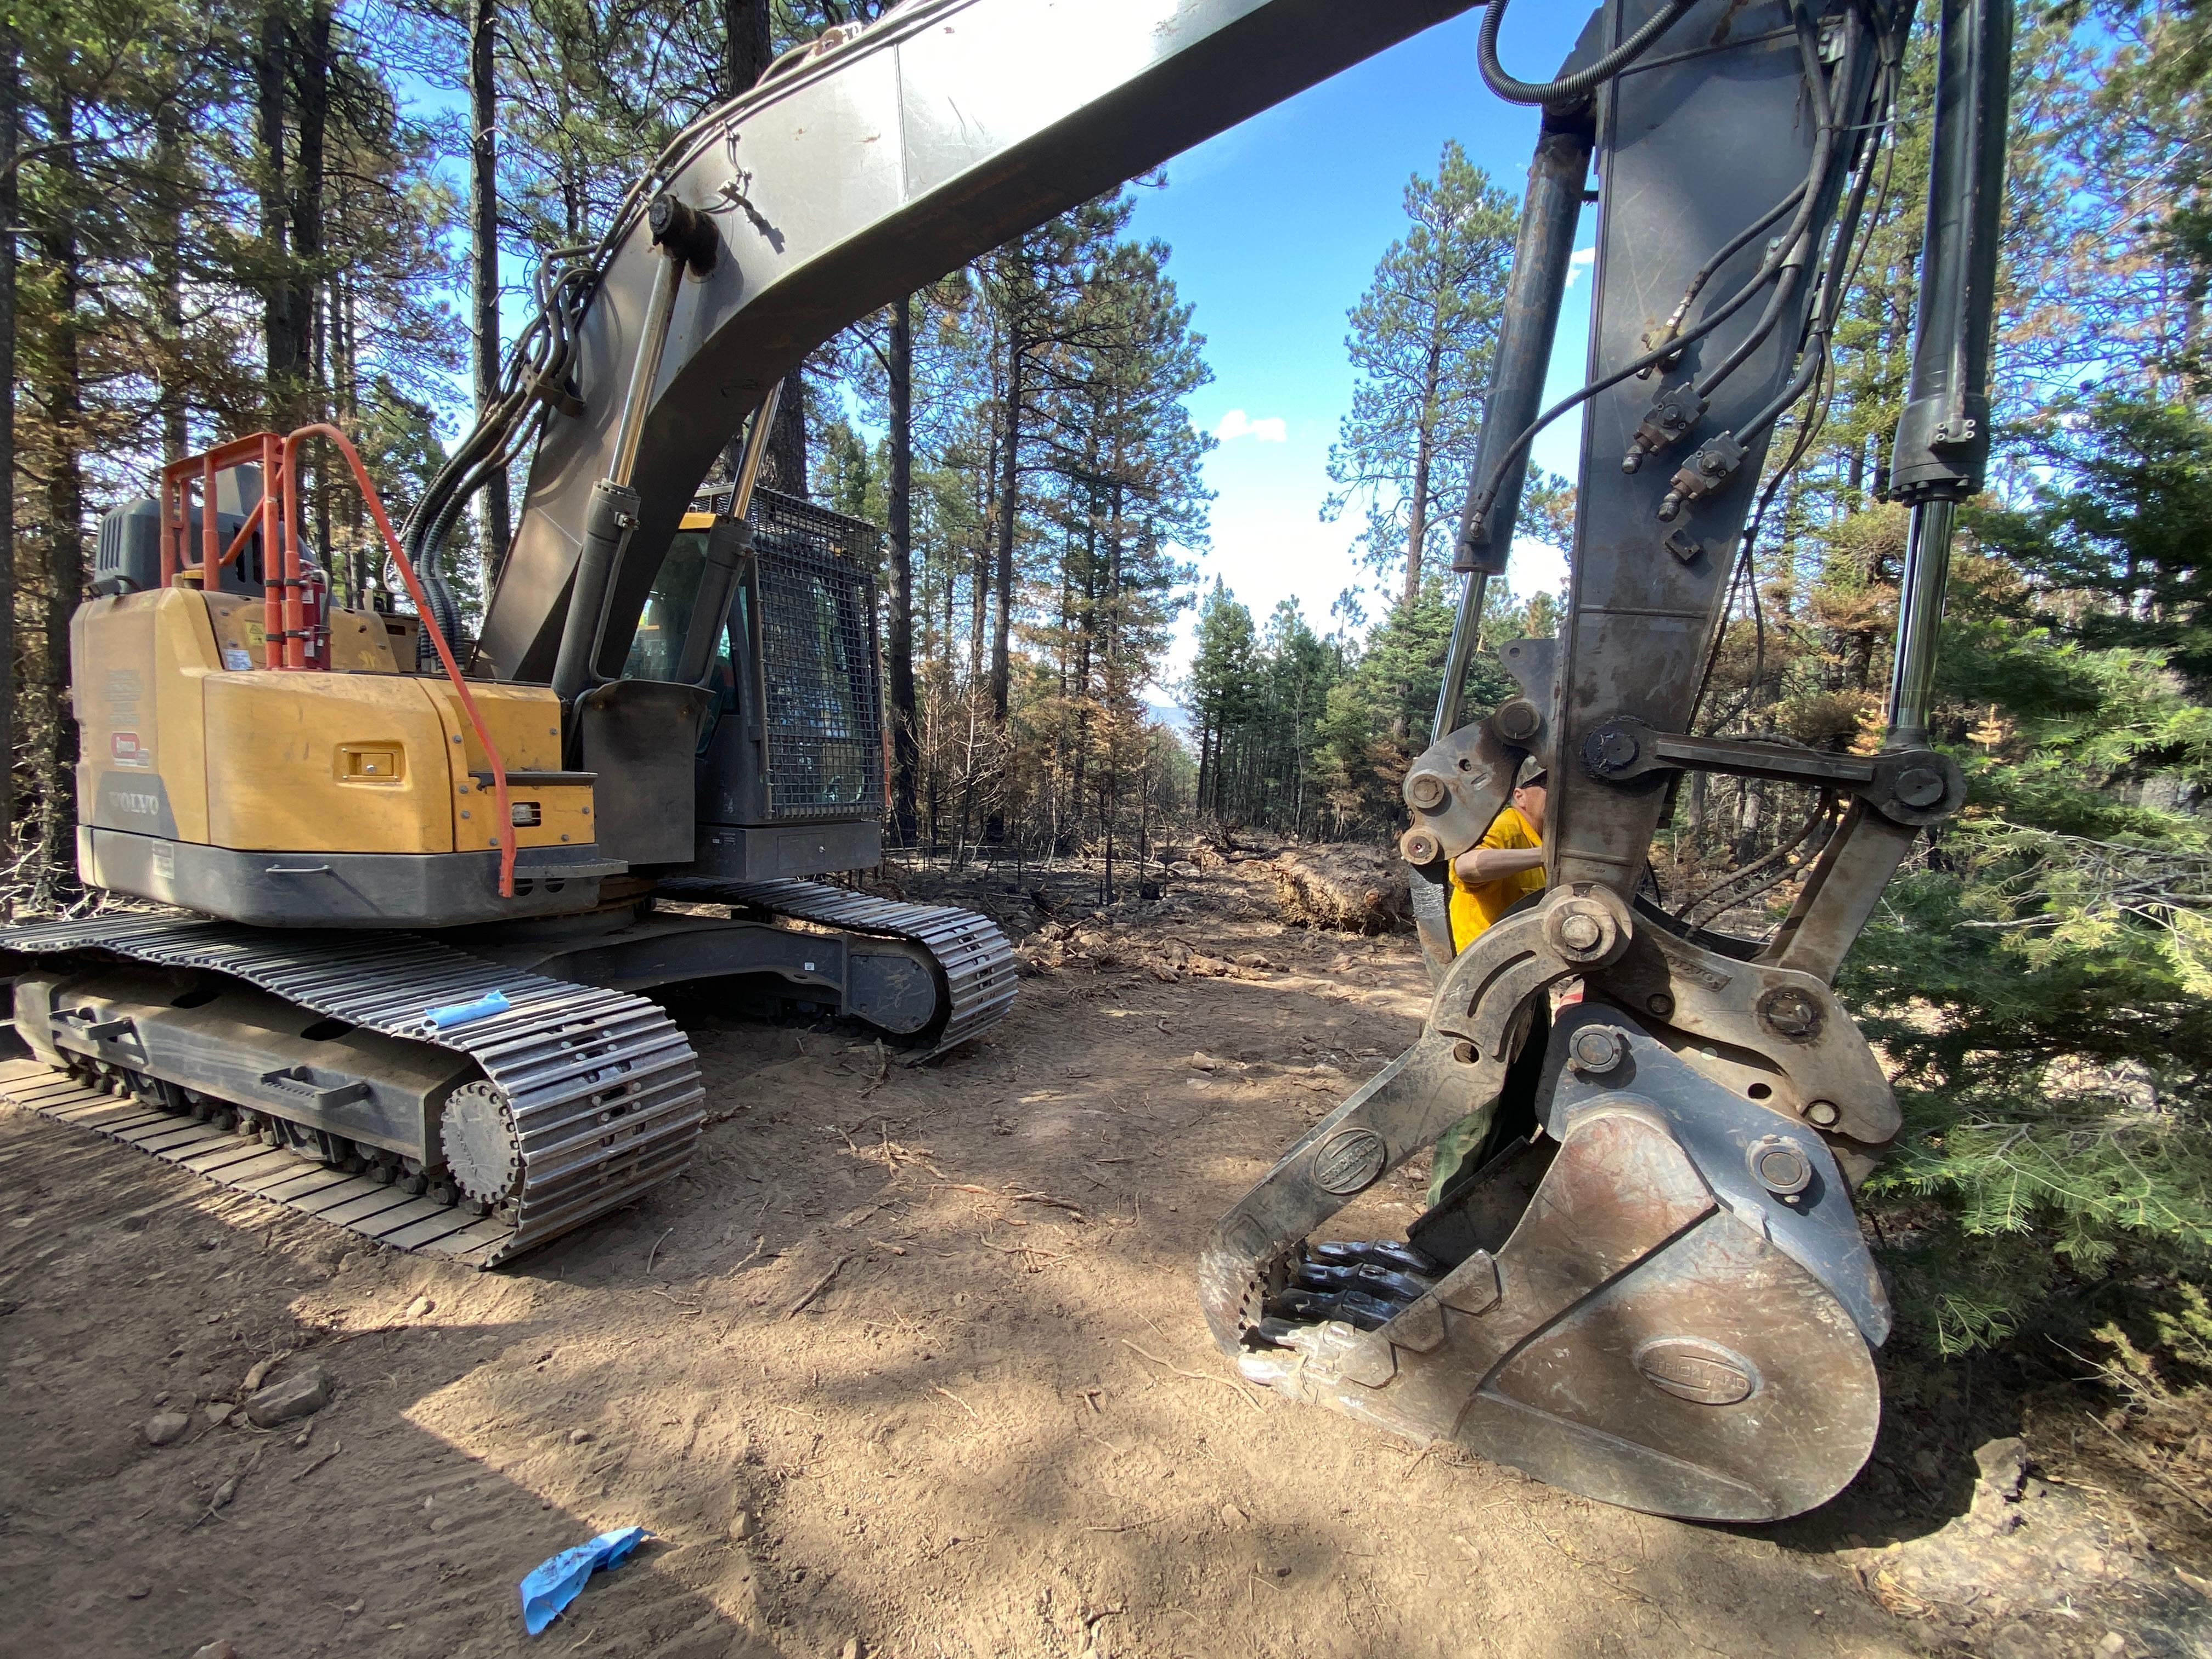 Image of an excavator, heavy piece of equipment. Machine is black and yellow with a bucket on the end of an arm extension. Surrounding area is a mix of burned and unburned vegetation. Heavy equipment operator in yellow shirt is standing behind equipment